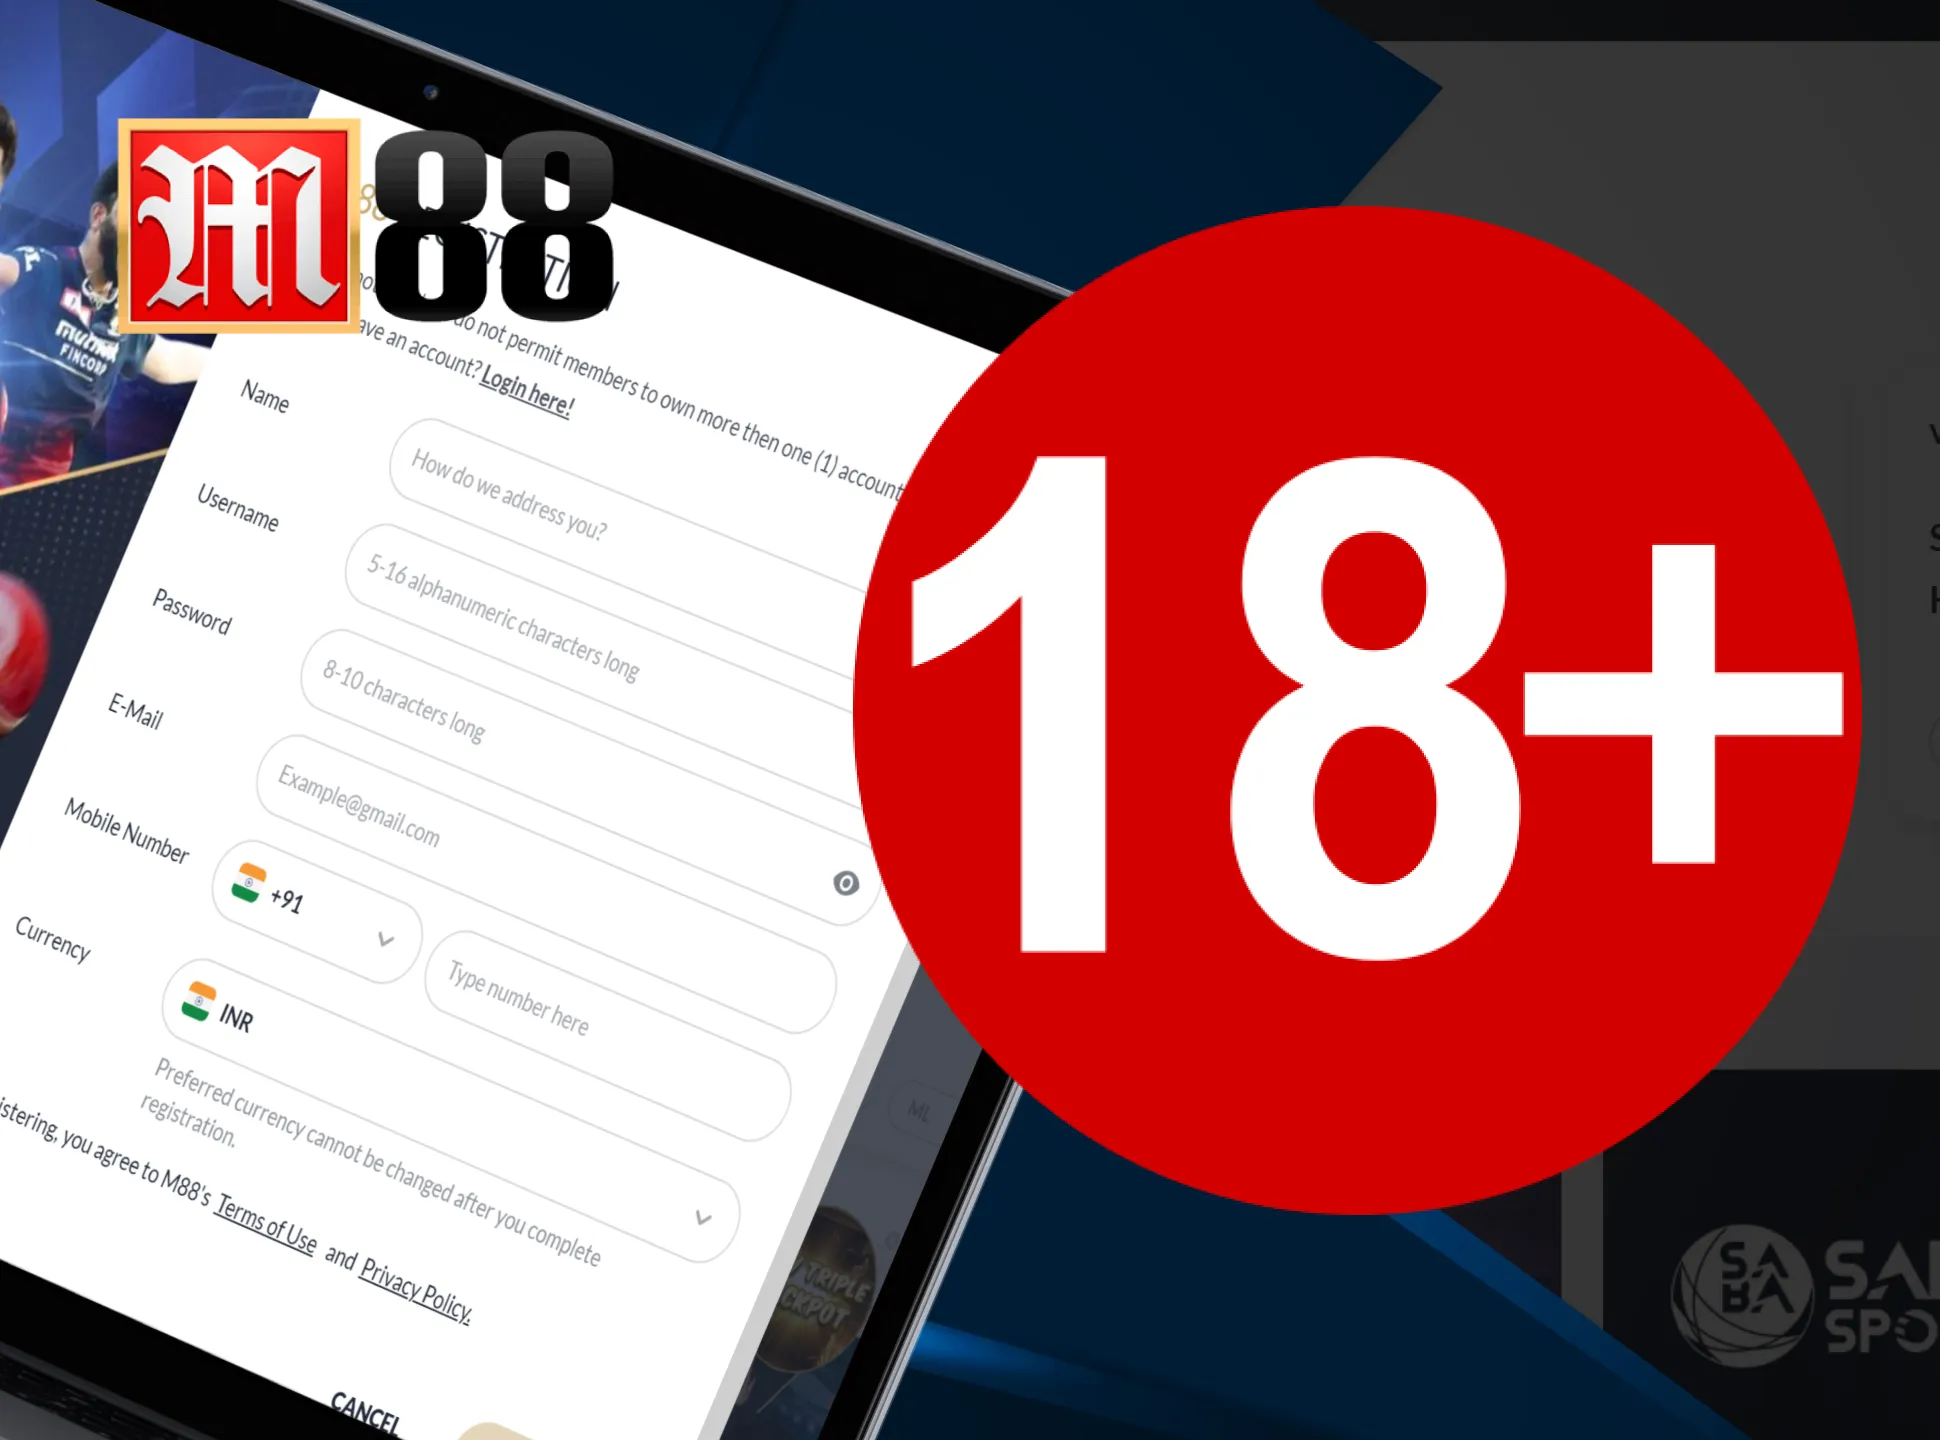 Follow all of the M88 registration rules.